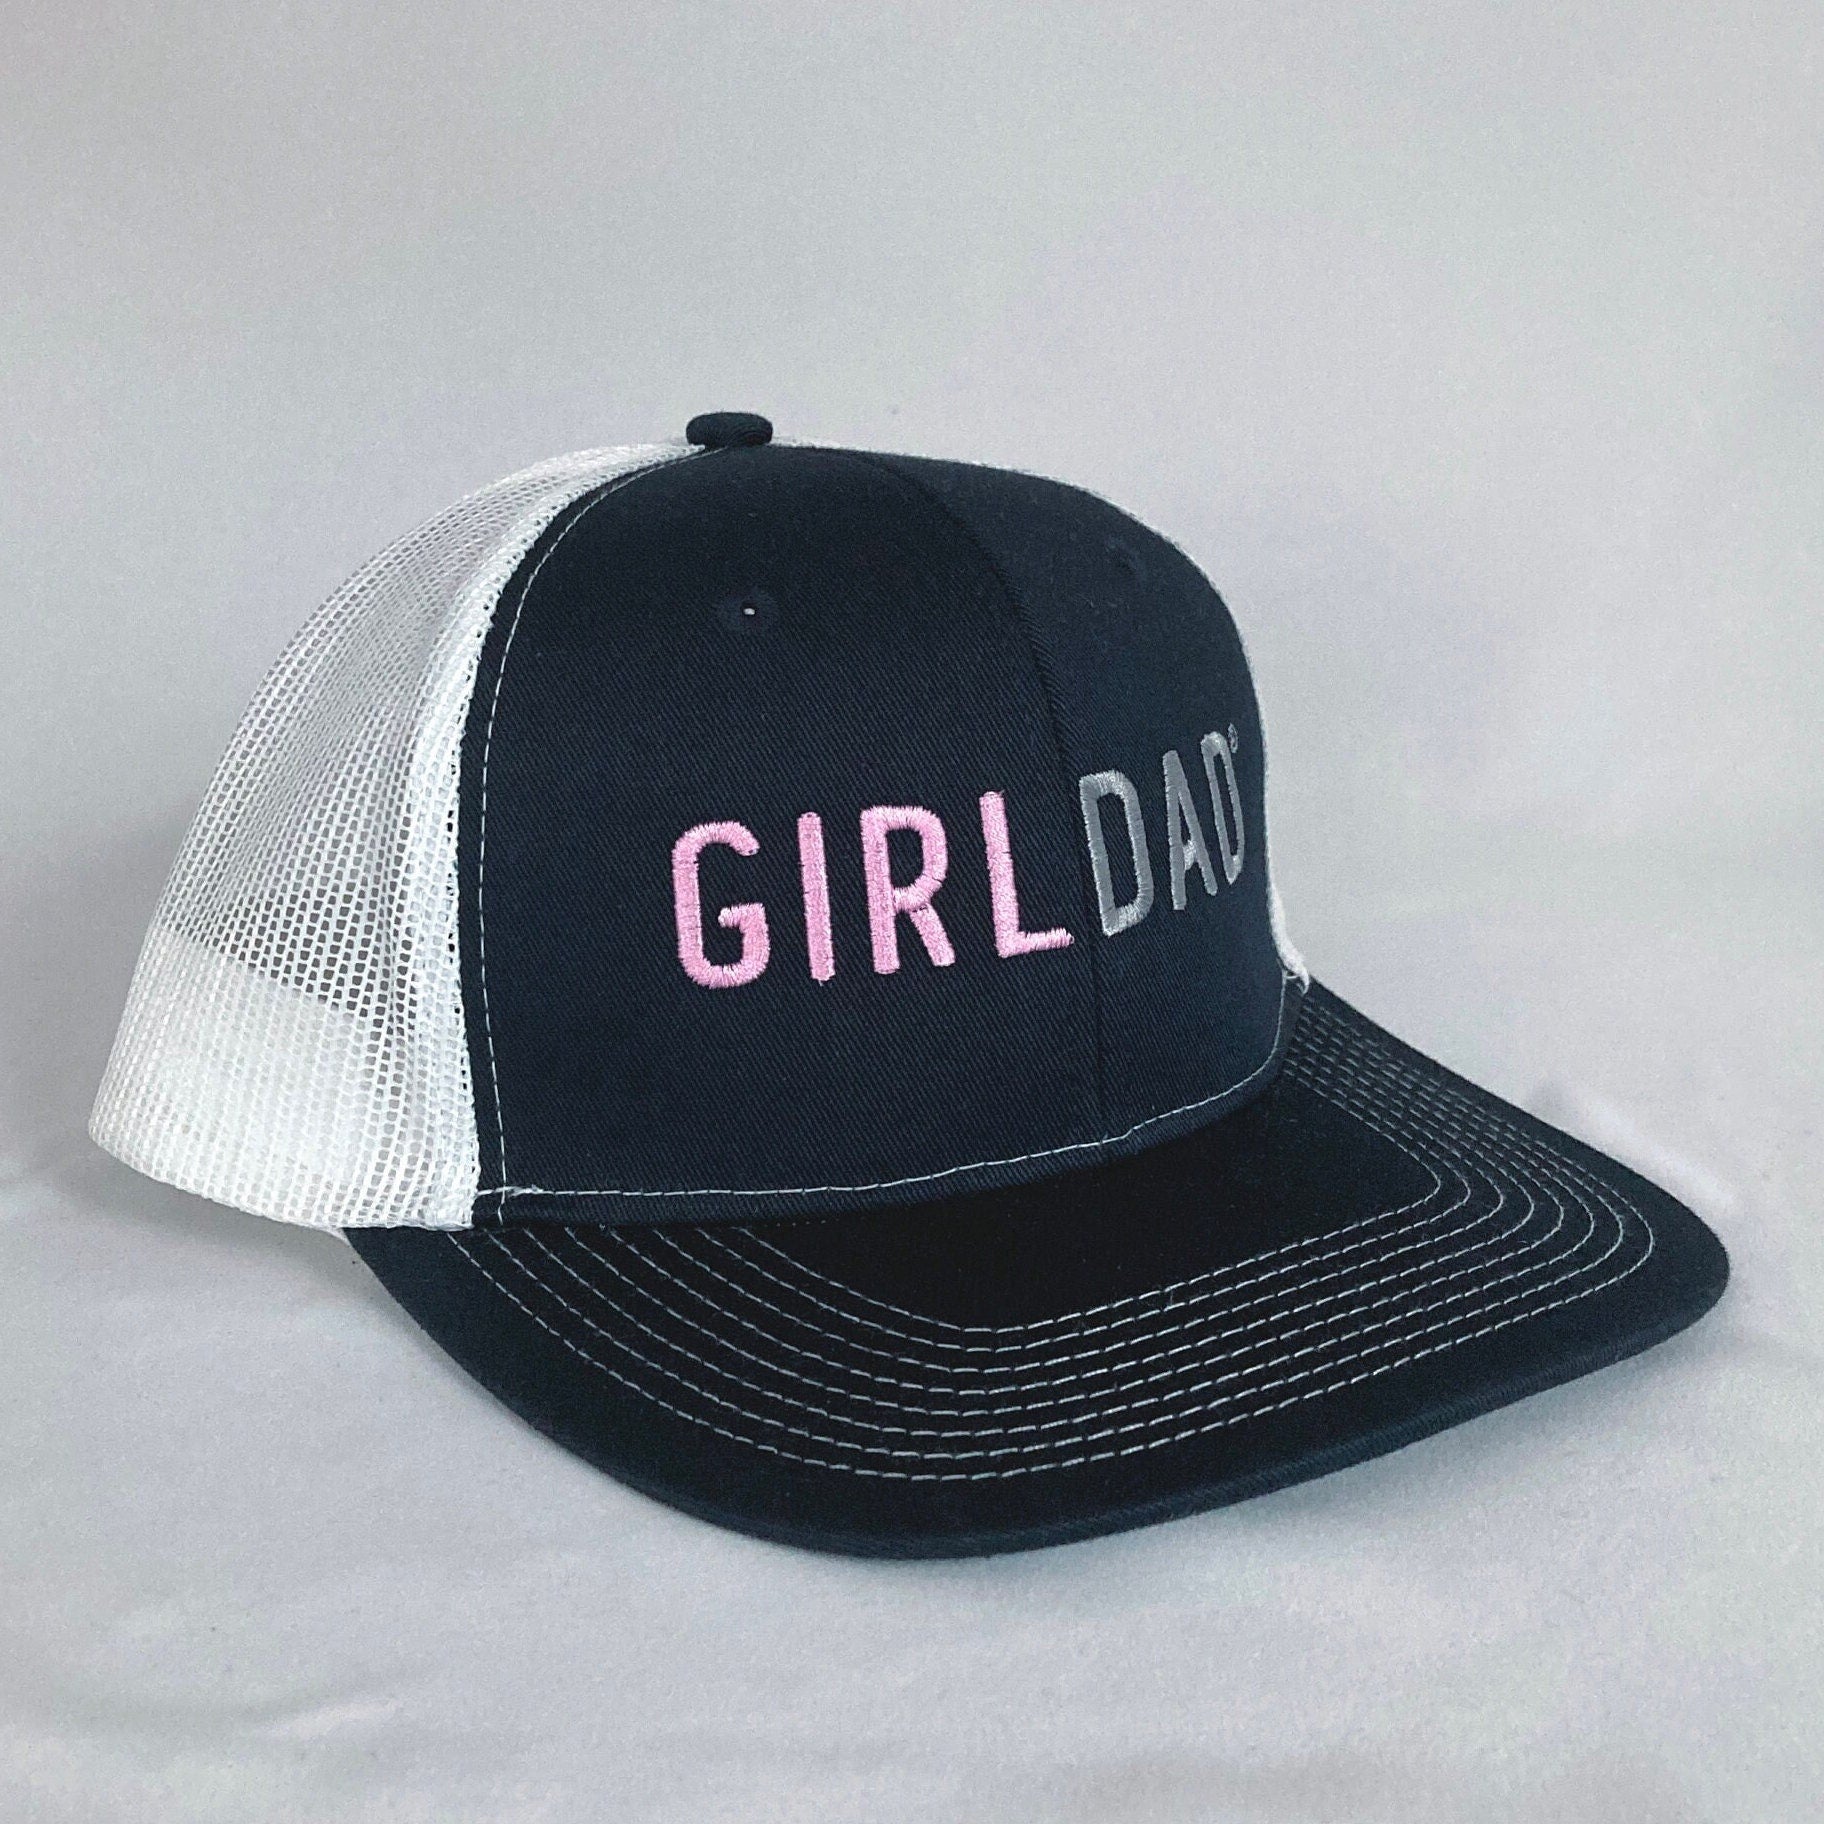 Girldad® Pink & Silver on Navy with White Mesh Embroidered Trucker Hat